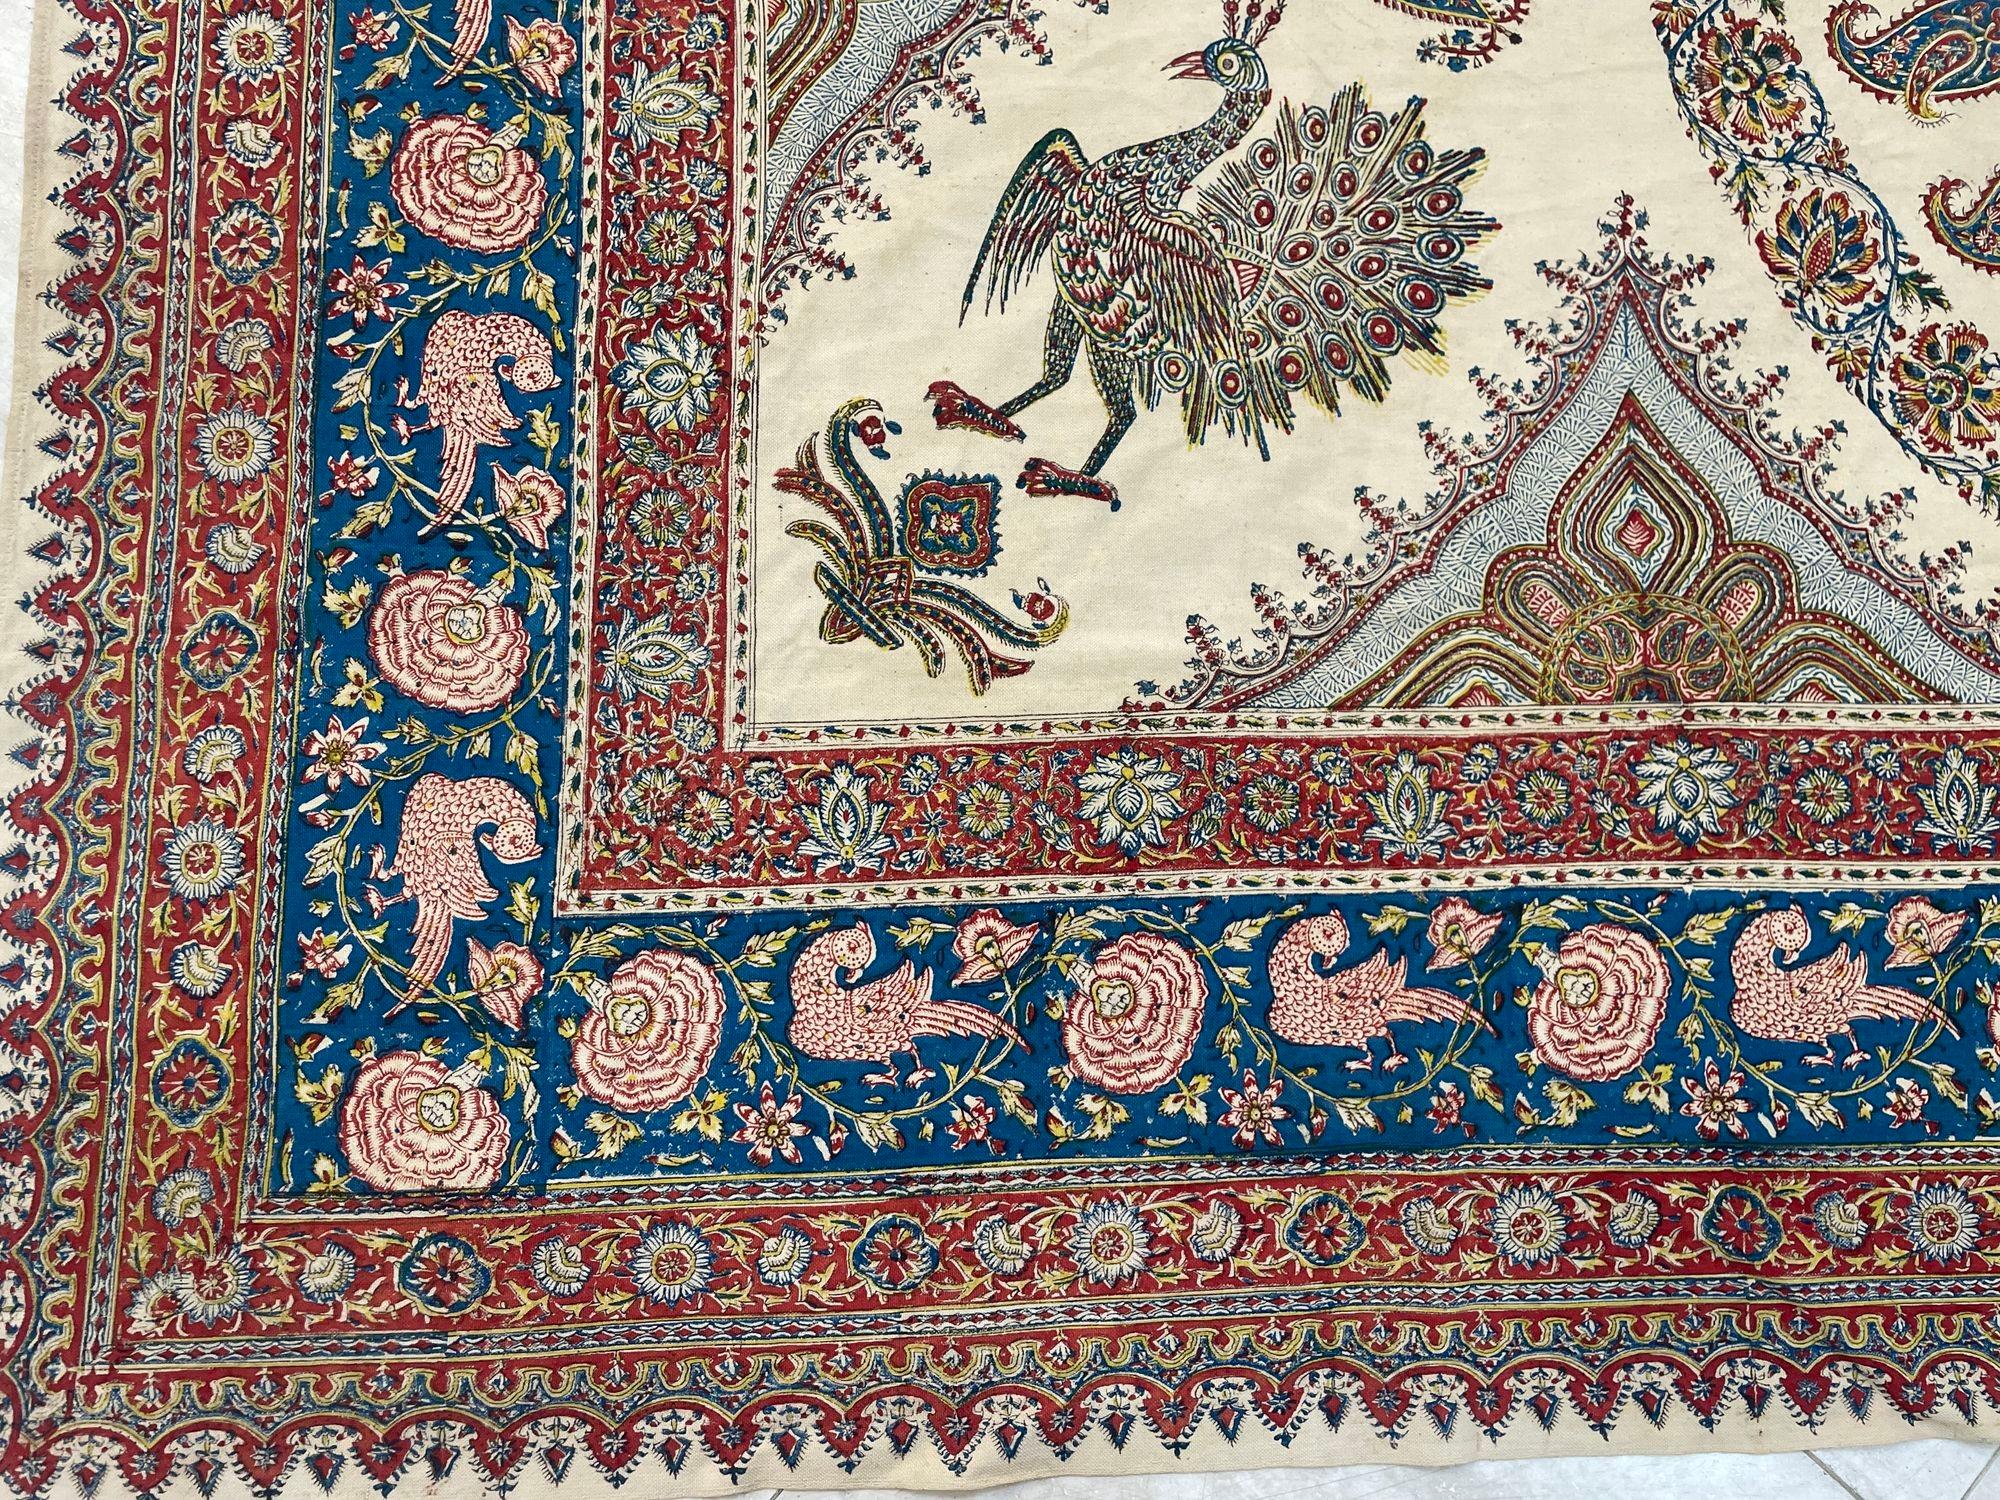 Hand-Crafted Large Isfahan Ghalamkar Persian Paisley Textile Block Printed 1950s For Sale